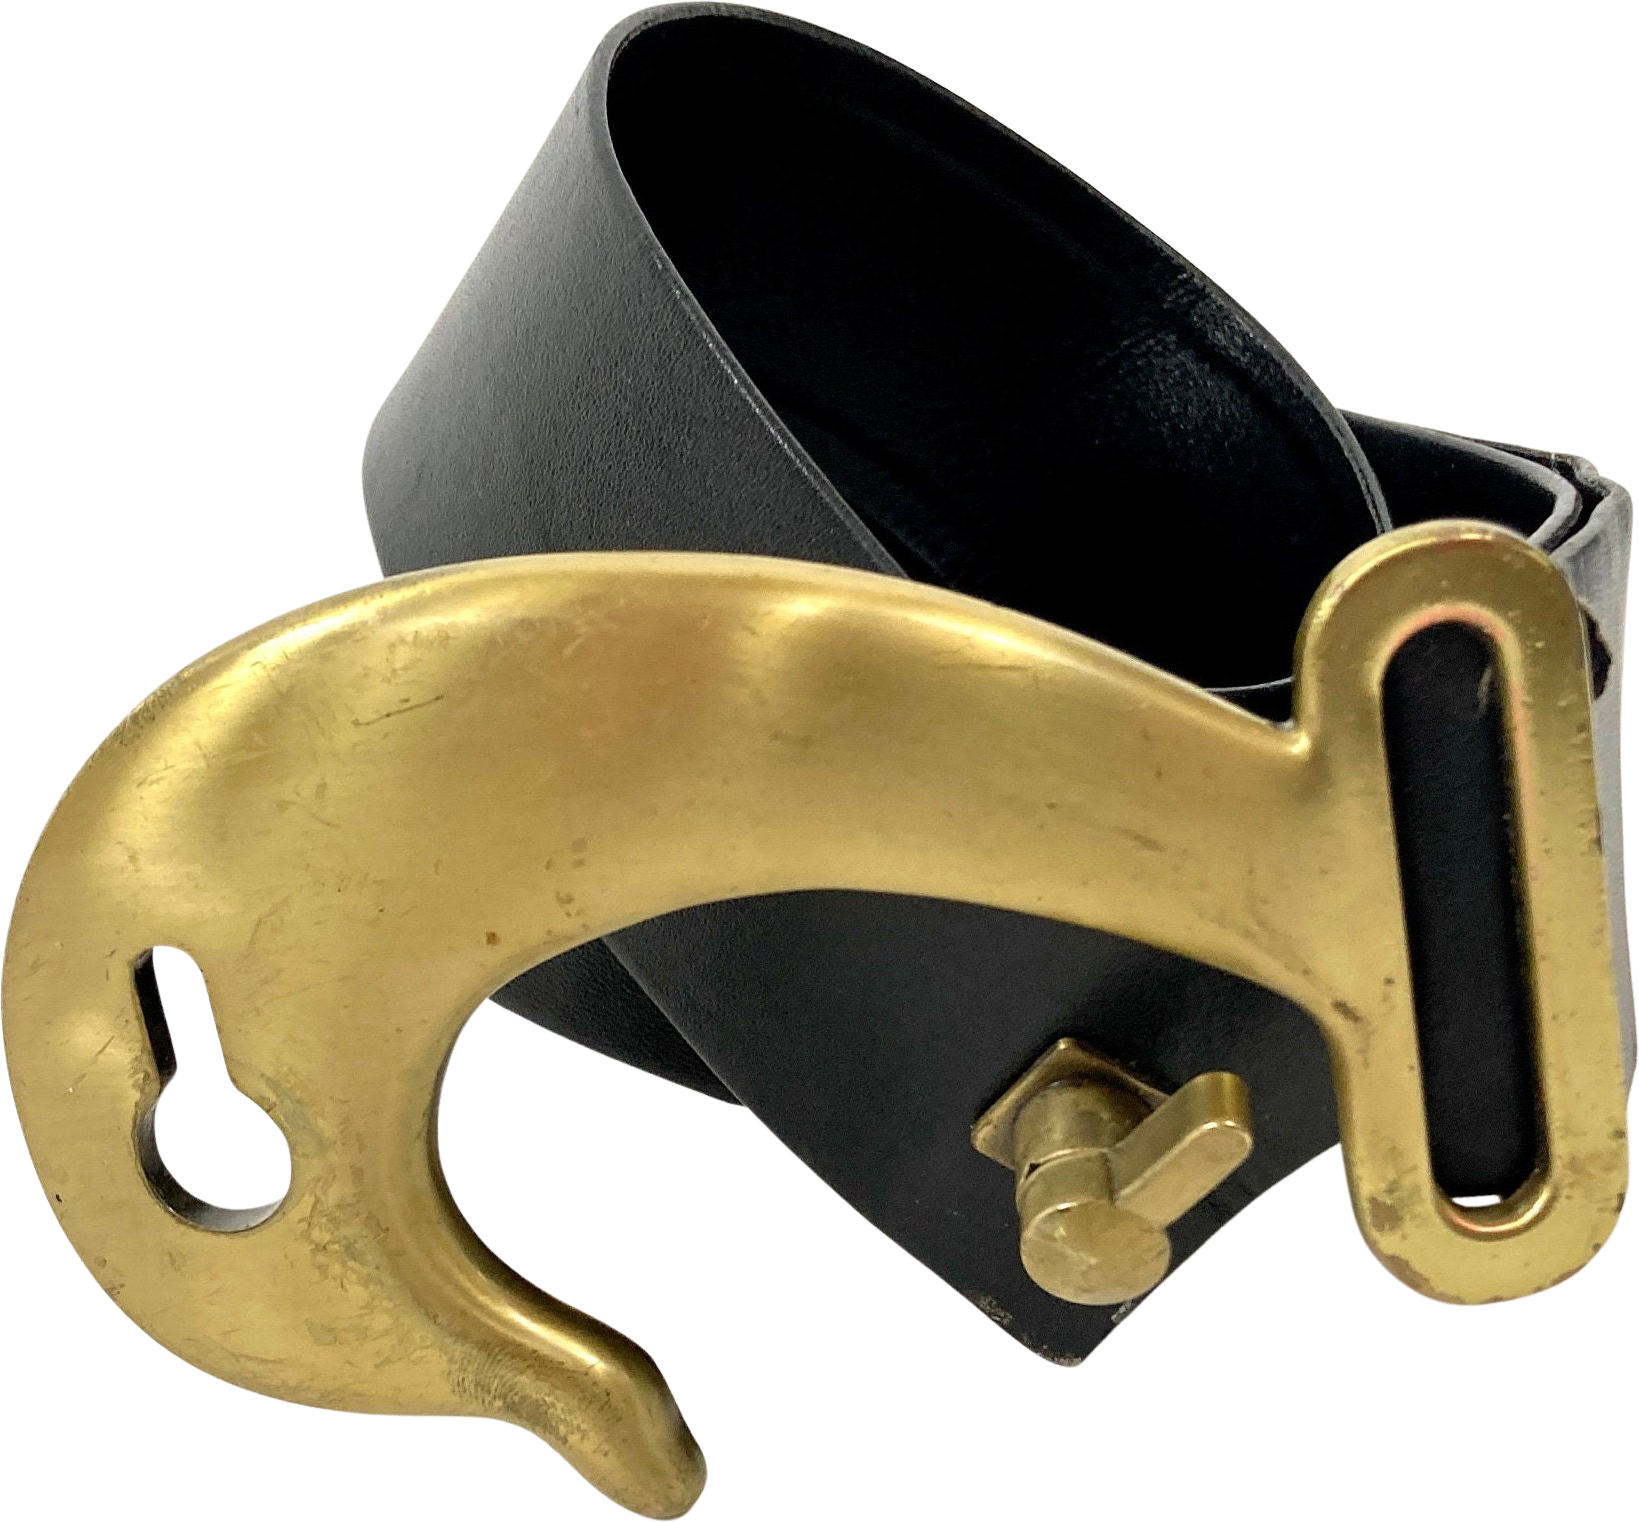 Modern Black Leather Belt with Brass Hook Buckle, 'Autonomous at Night